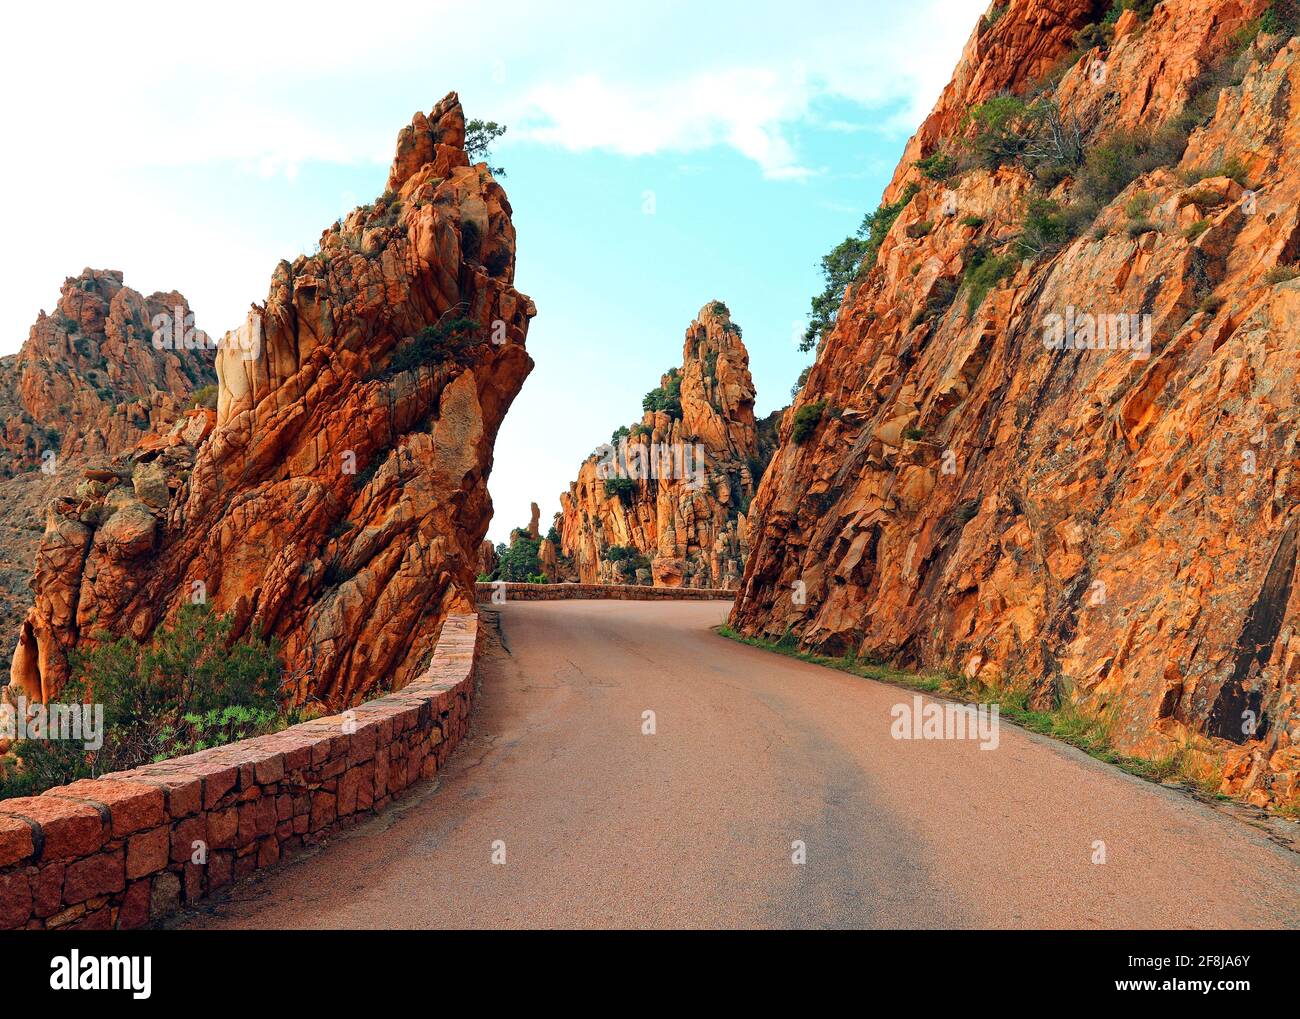 road called D81 in Corsica France and the red rocks called Calanches Stock Photo